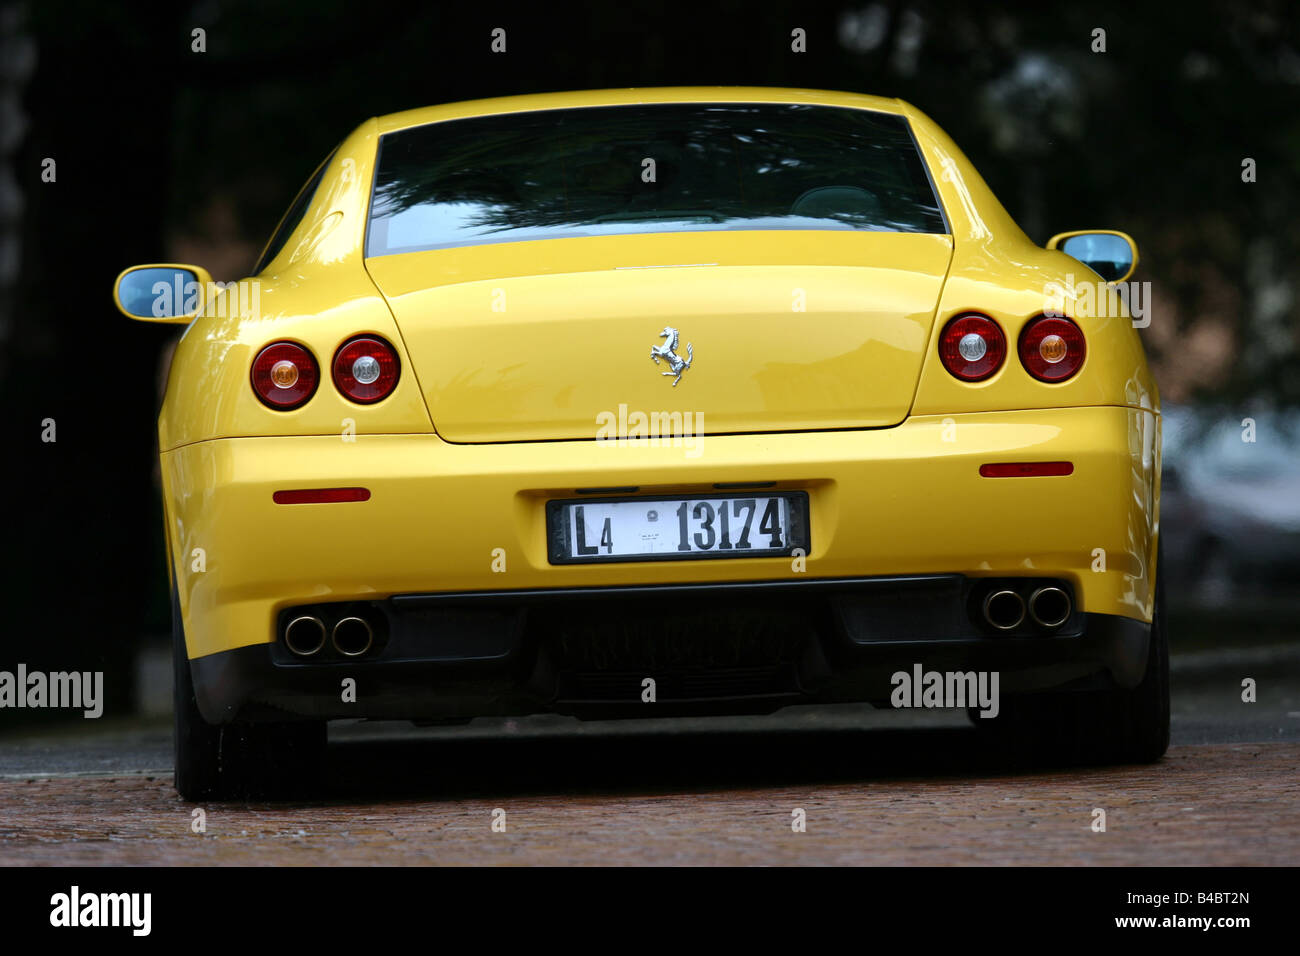 Car, Ferrari 612 Sapprox.lietti, roadster, model year 2004-, coupe/Coupe, yellow, driving, standing, upholding, diagonal from th Stock Photo